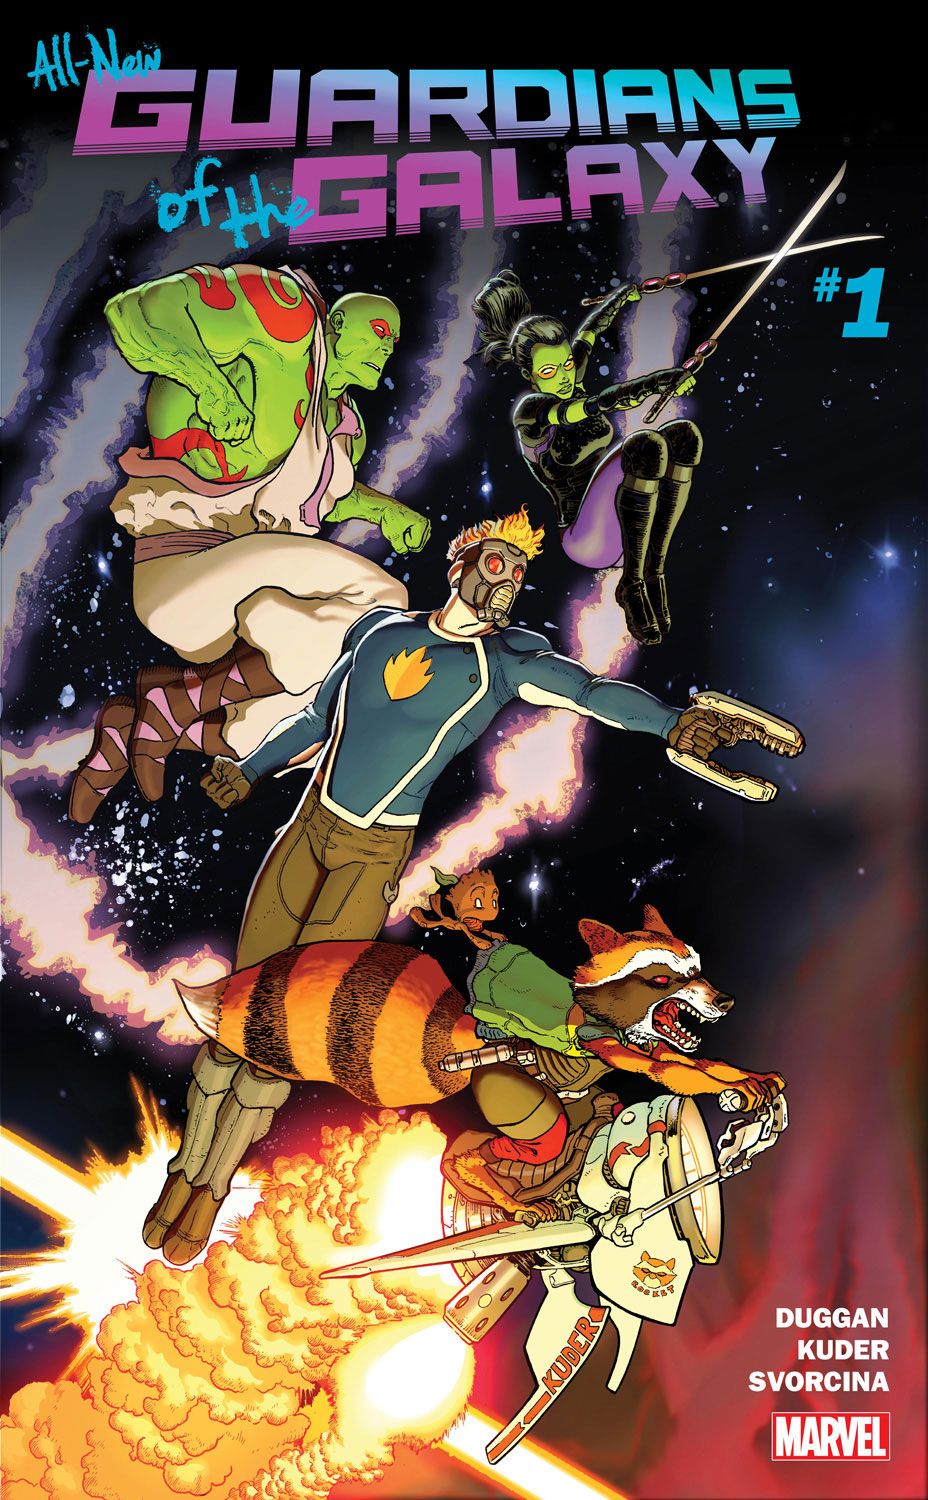 All-New Guardians of the Galaxy #1 cover art by Aaron Kuder